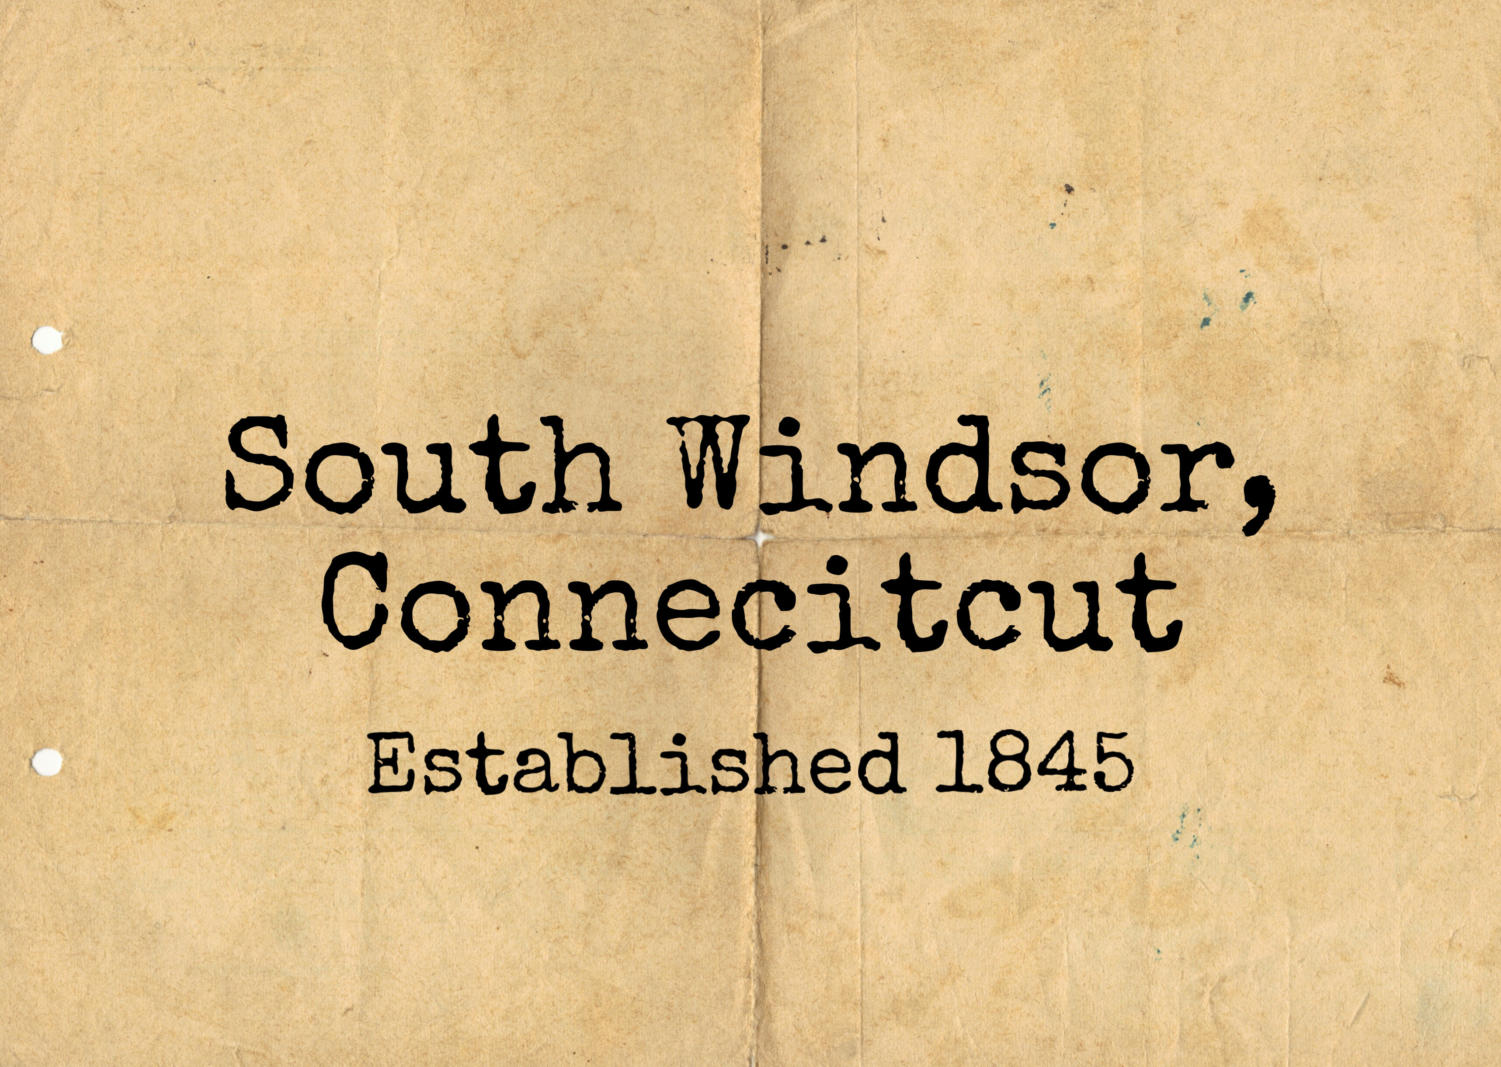 Historical Sites in South Windsor